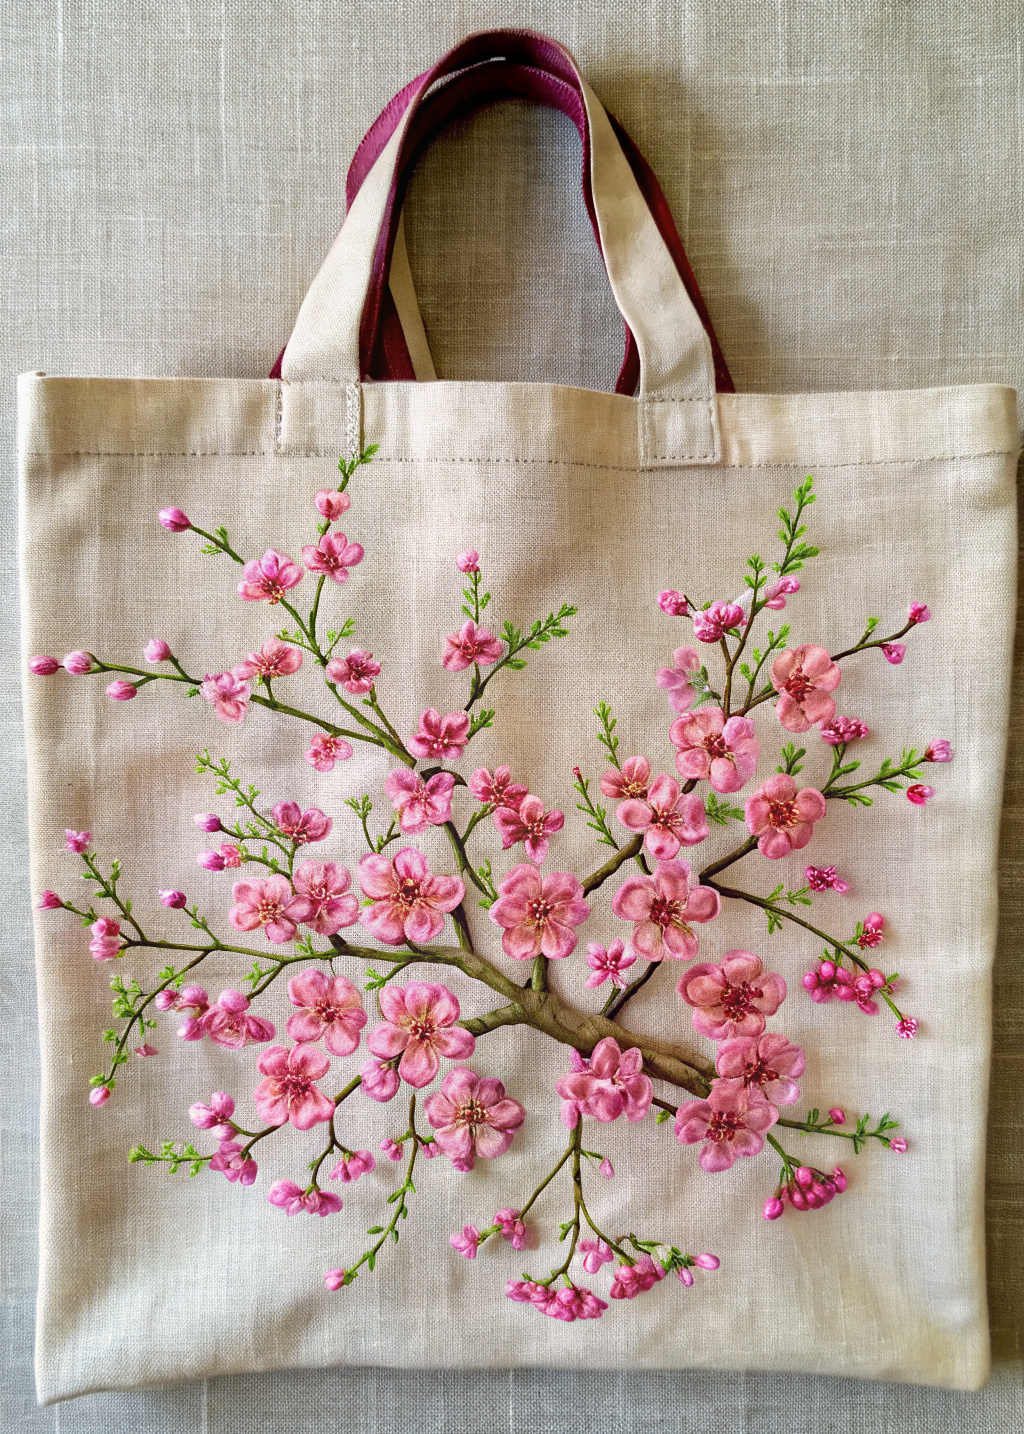 embroidery, cherry blossom on the shopper